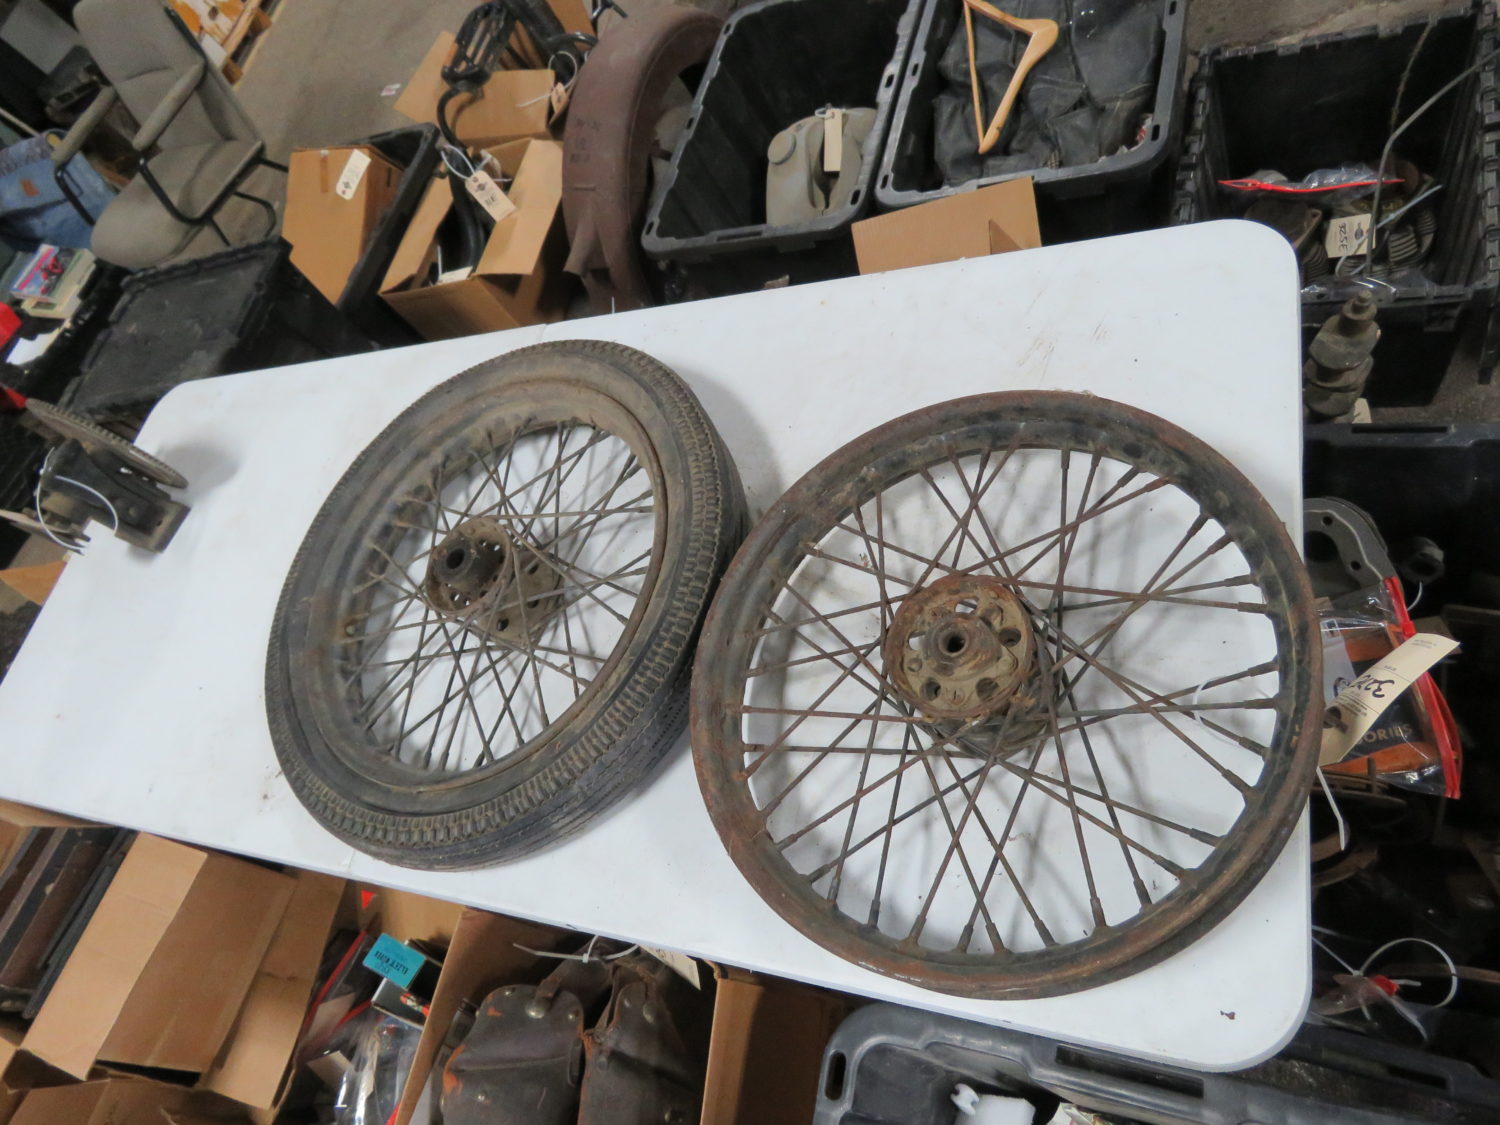 The K.C. Motorcycle Collection Auction- Motorcycles, Memorabilia, and HUGE Harley DavidsonParts Stash! - image 17